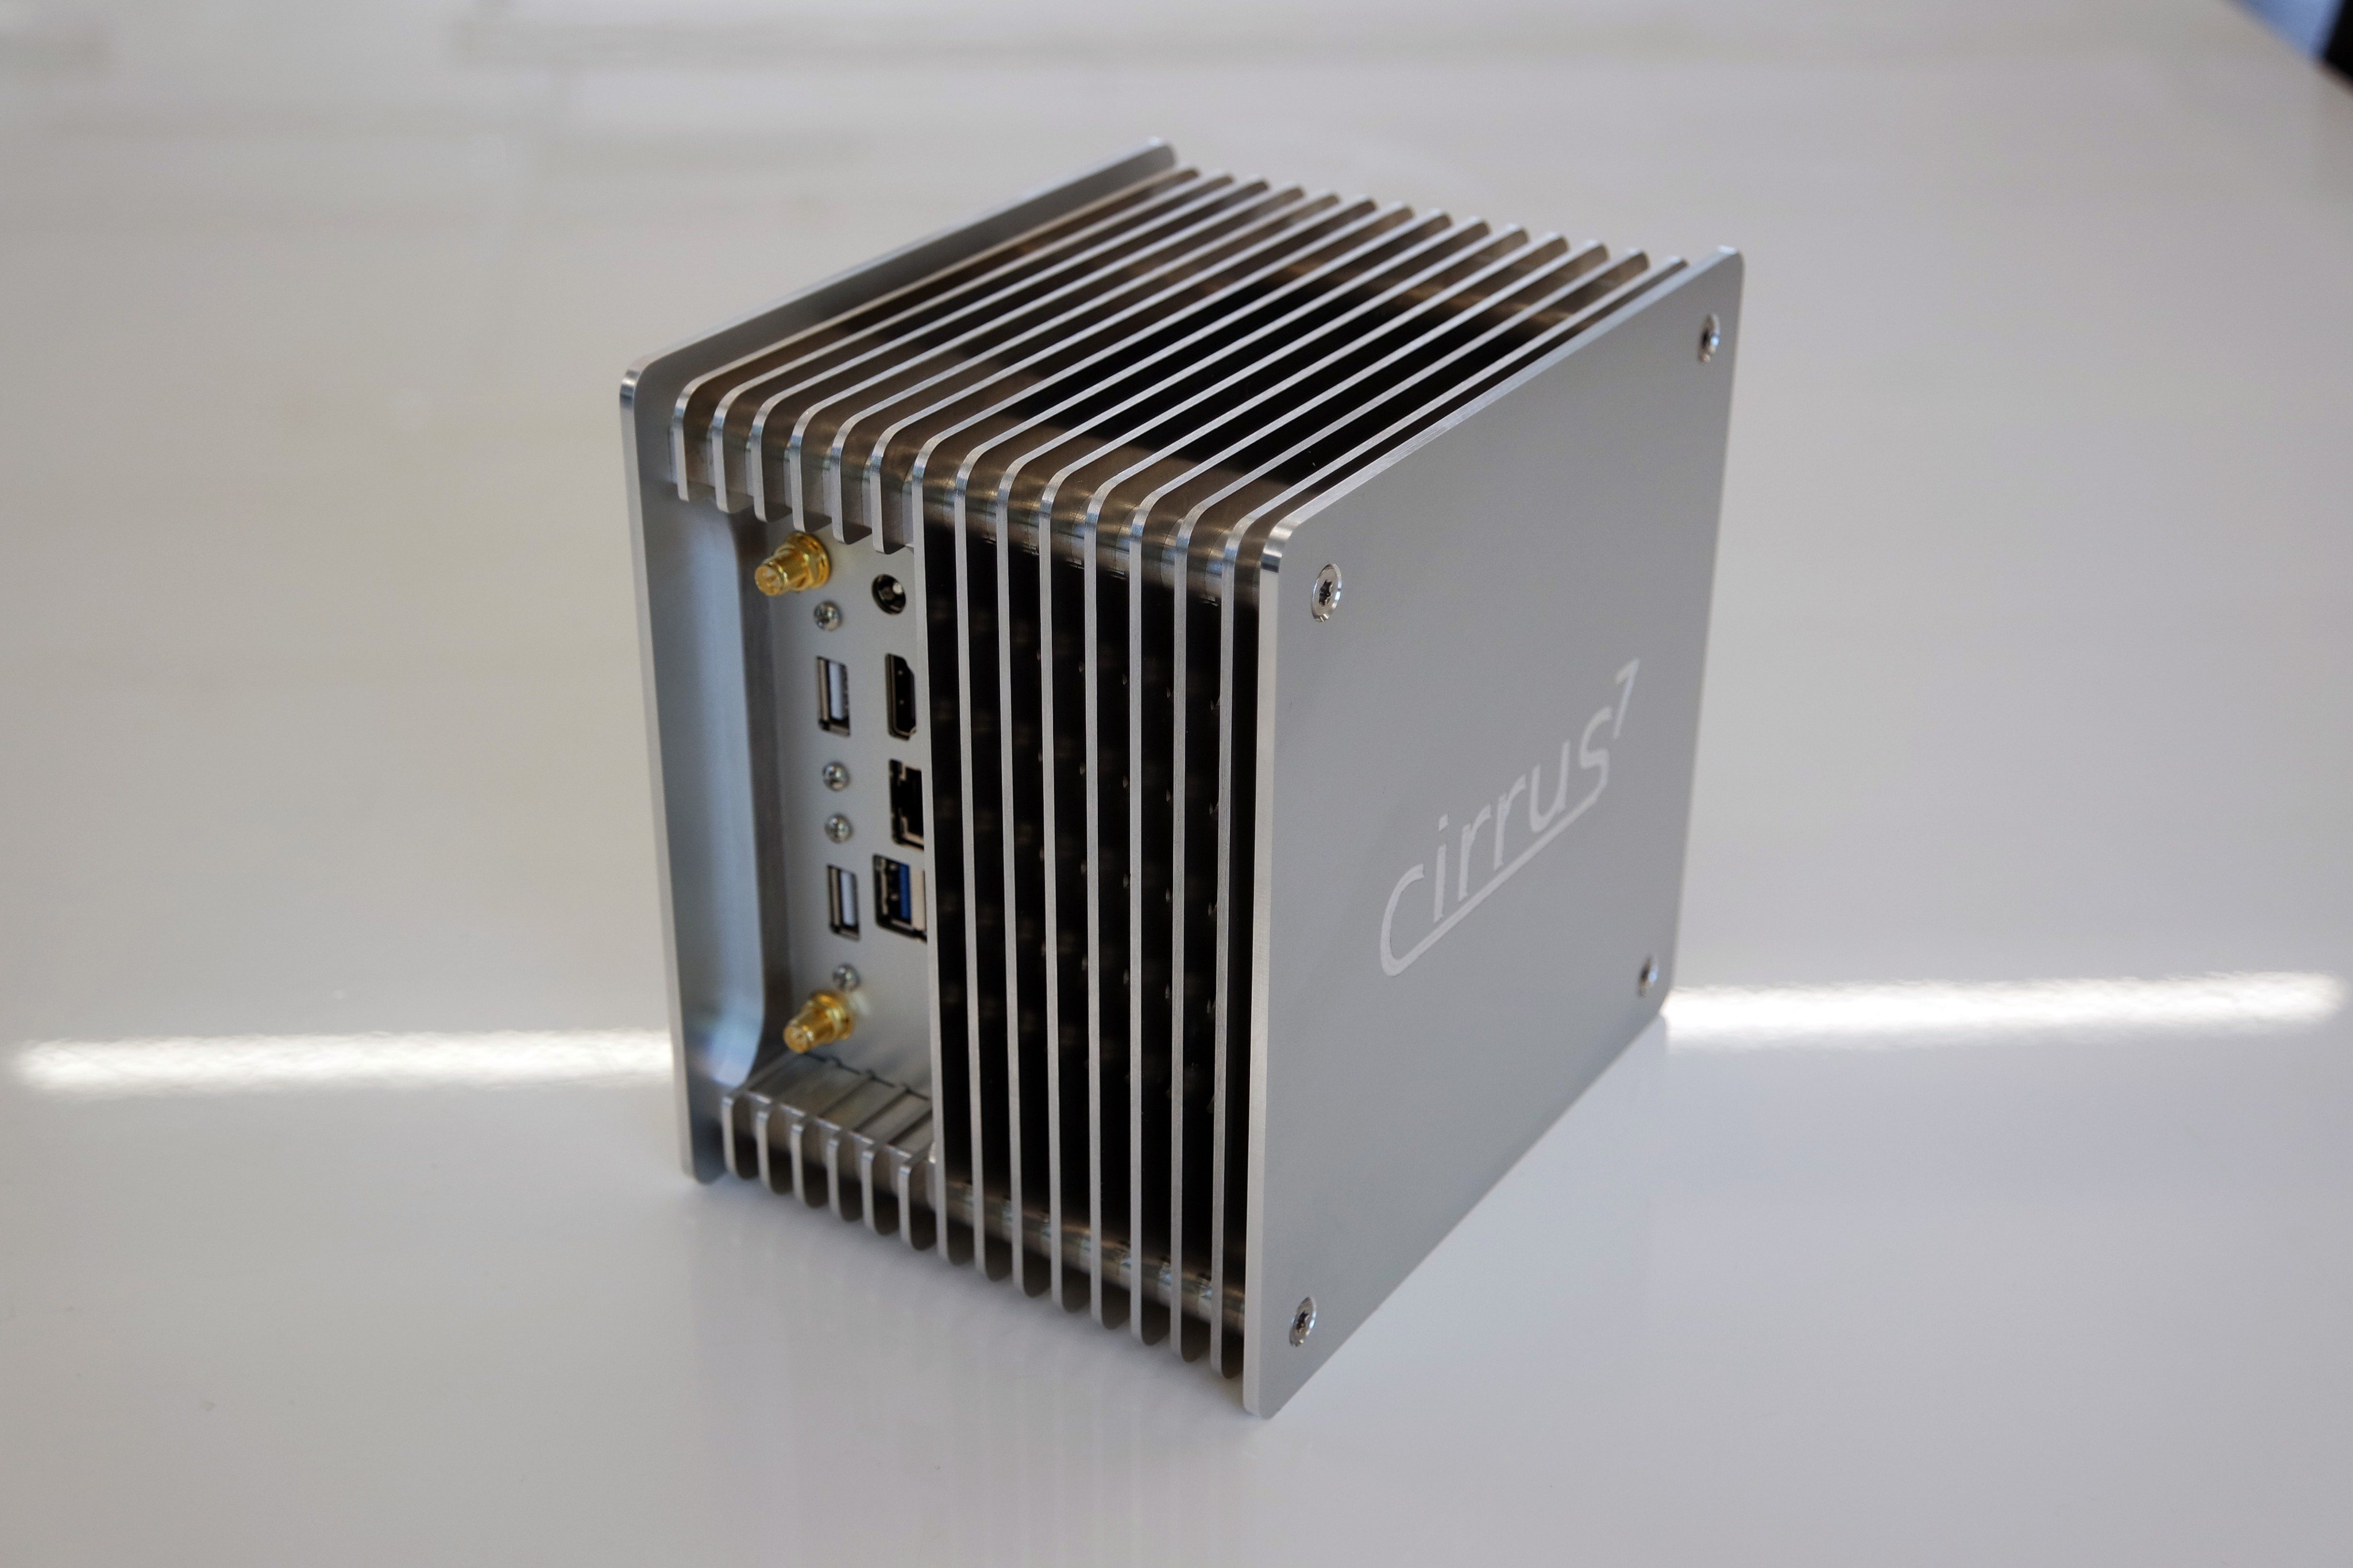 cirrus7 - fanless mini-PCs - made in Germany